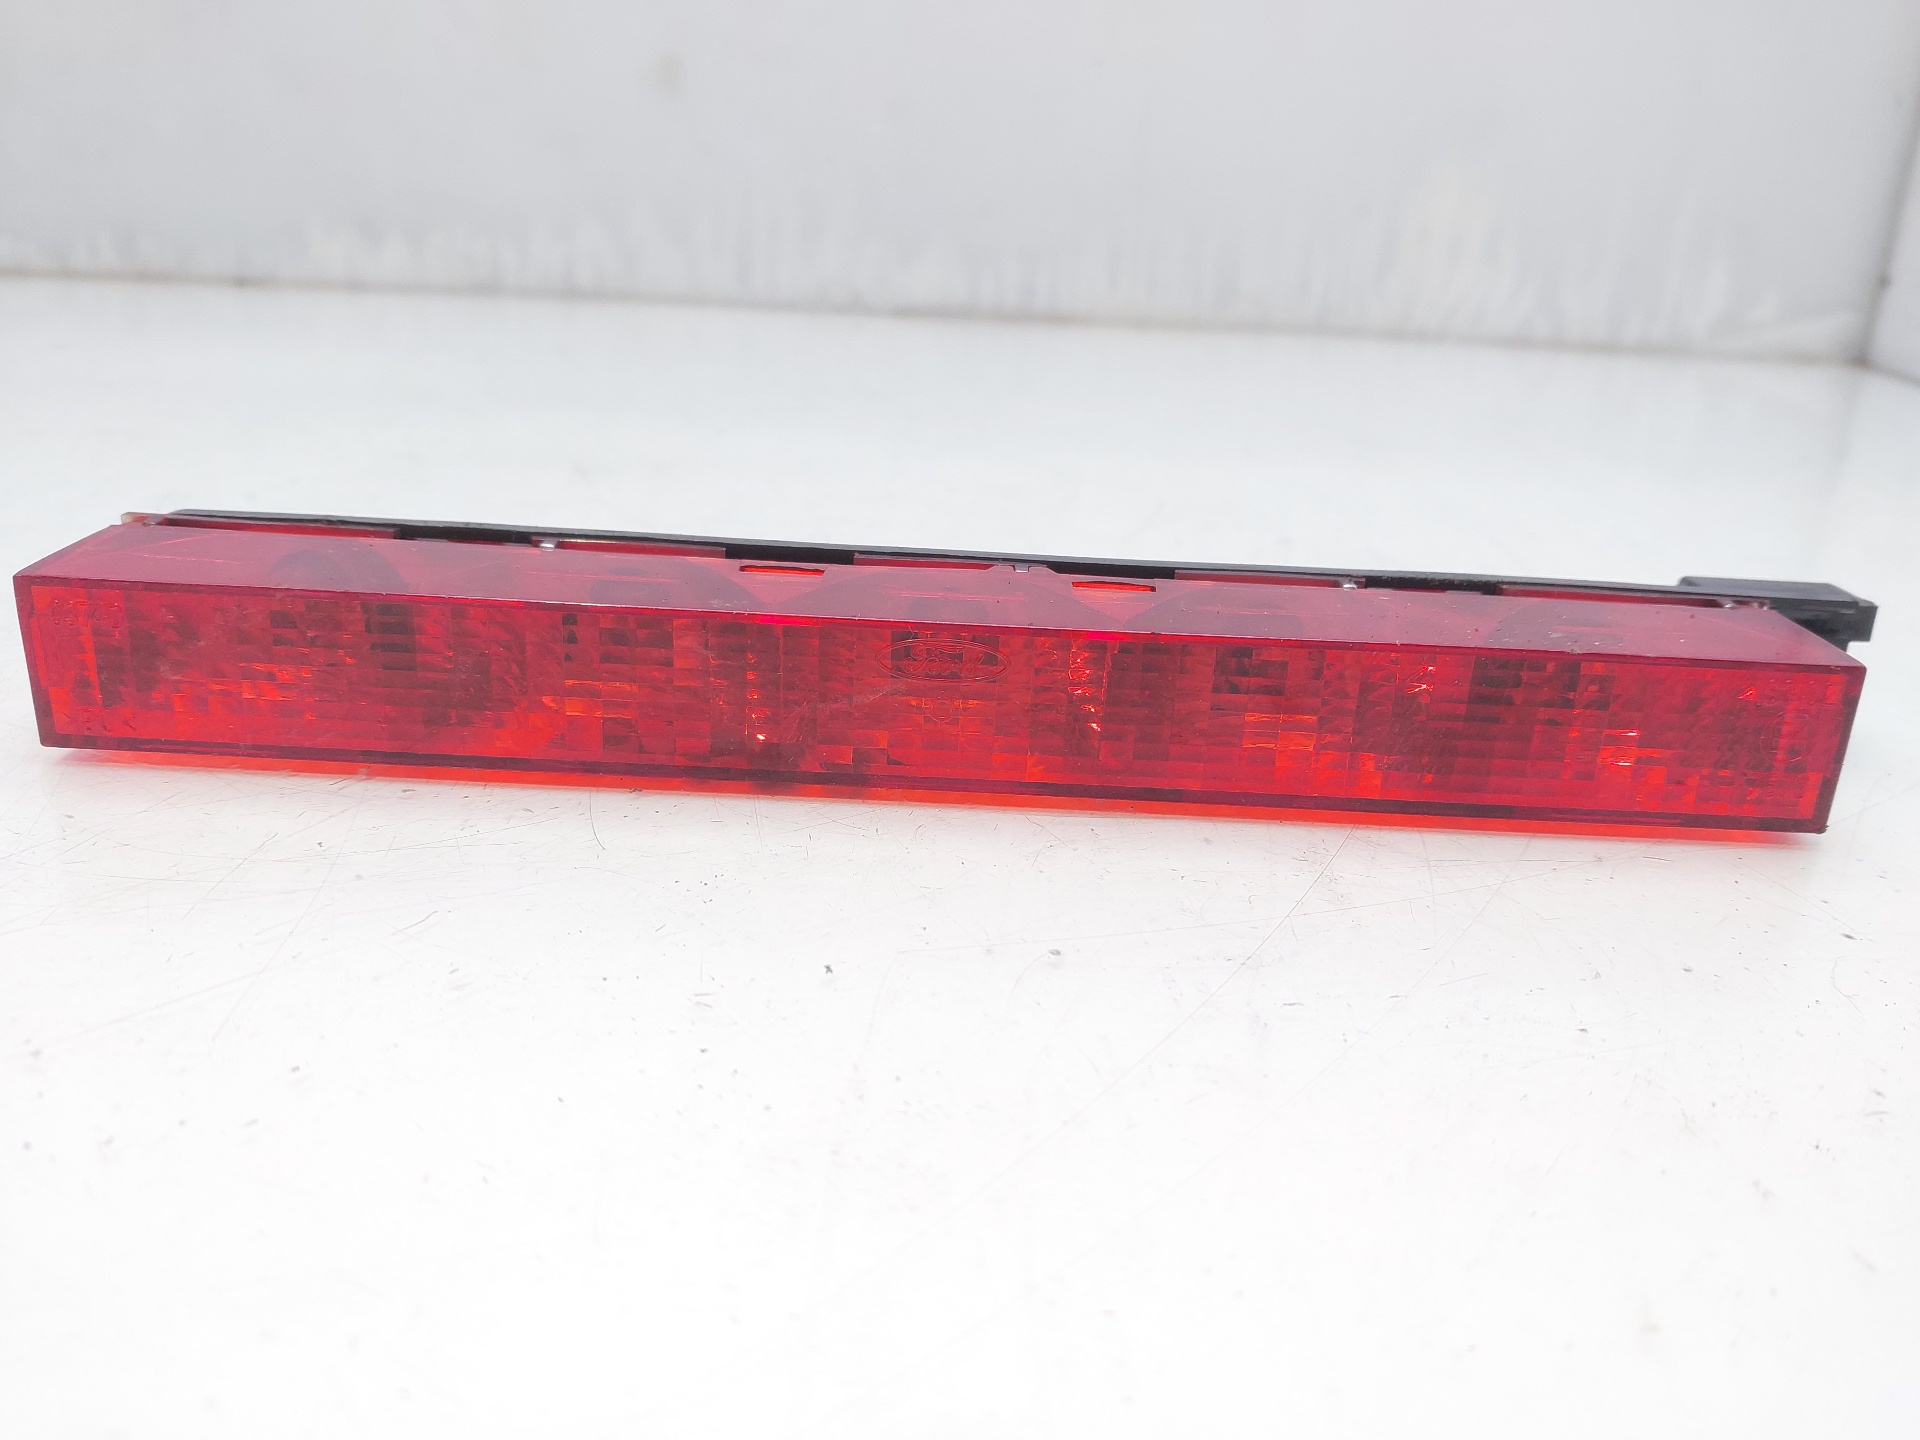 PEUGEOT Focus 2 generation (2004-2011) Rear cover light 1S7113A613AE 20643975